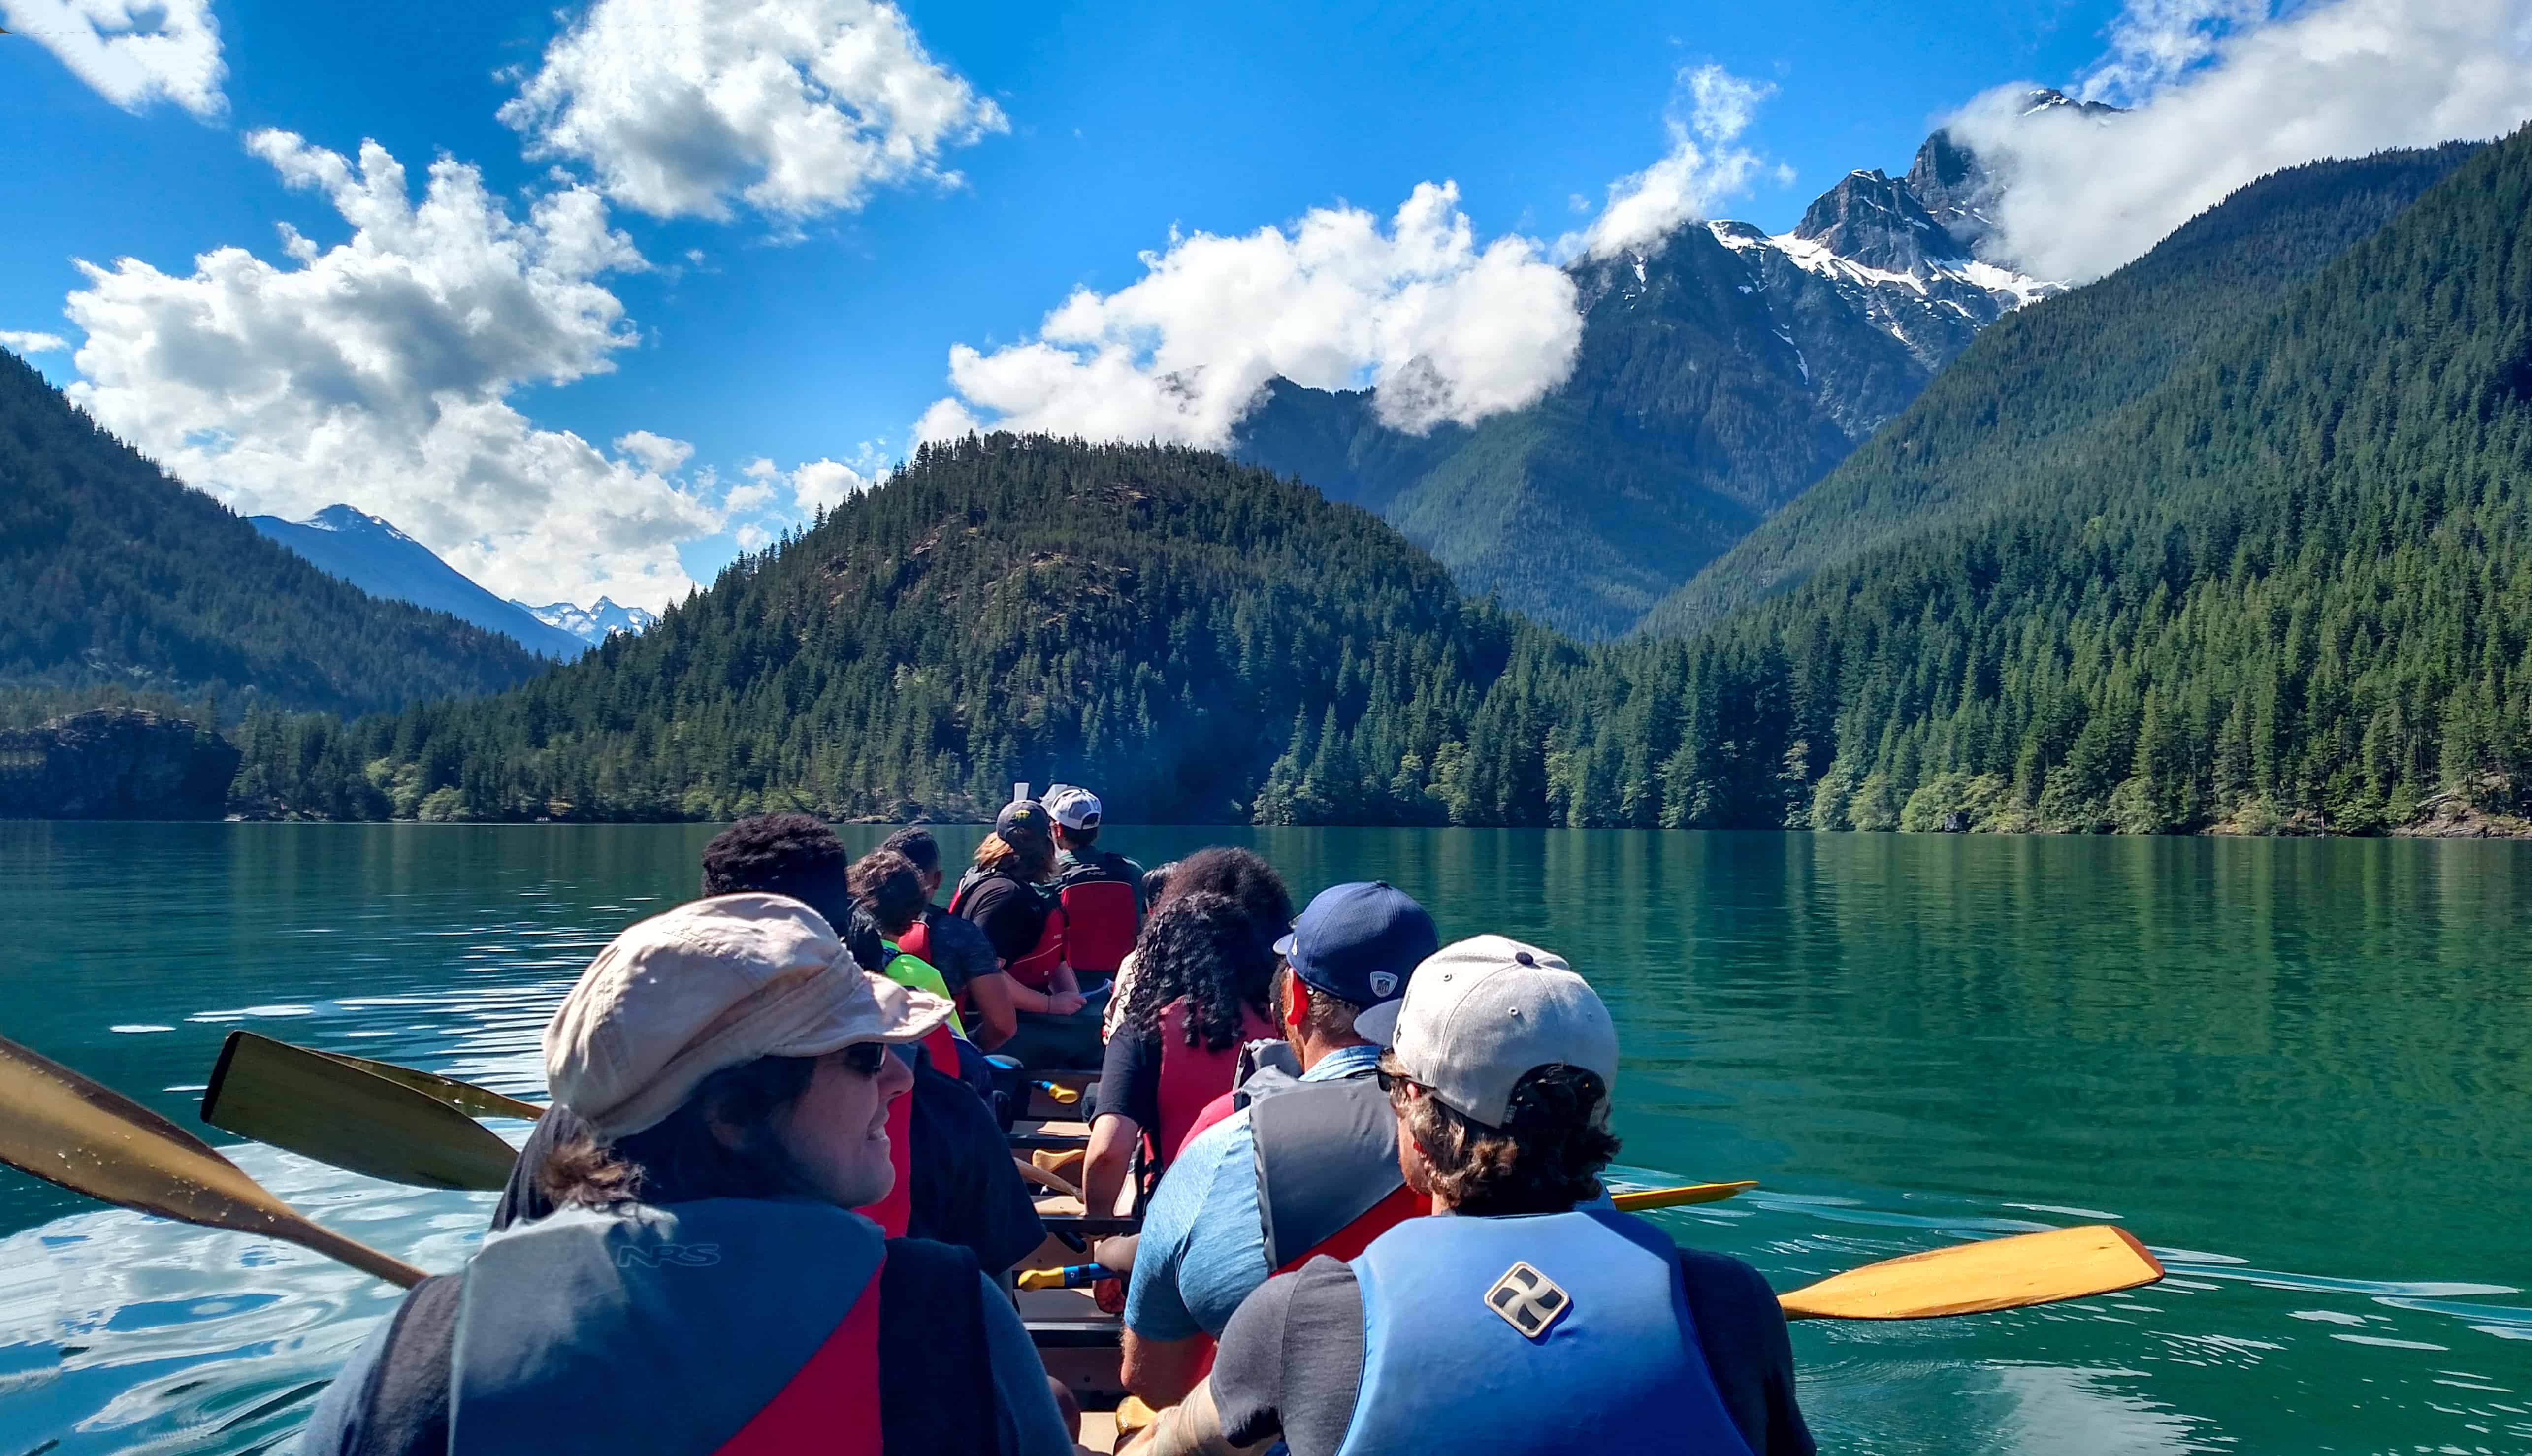 A group of adults taking in the beauty of Colonial Peak from a canoe on Diablo Lake